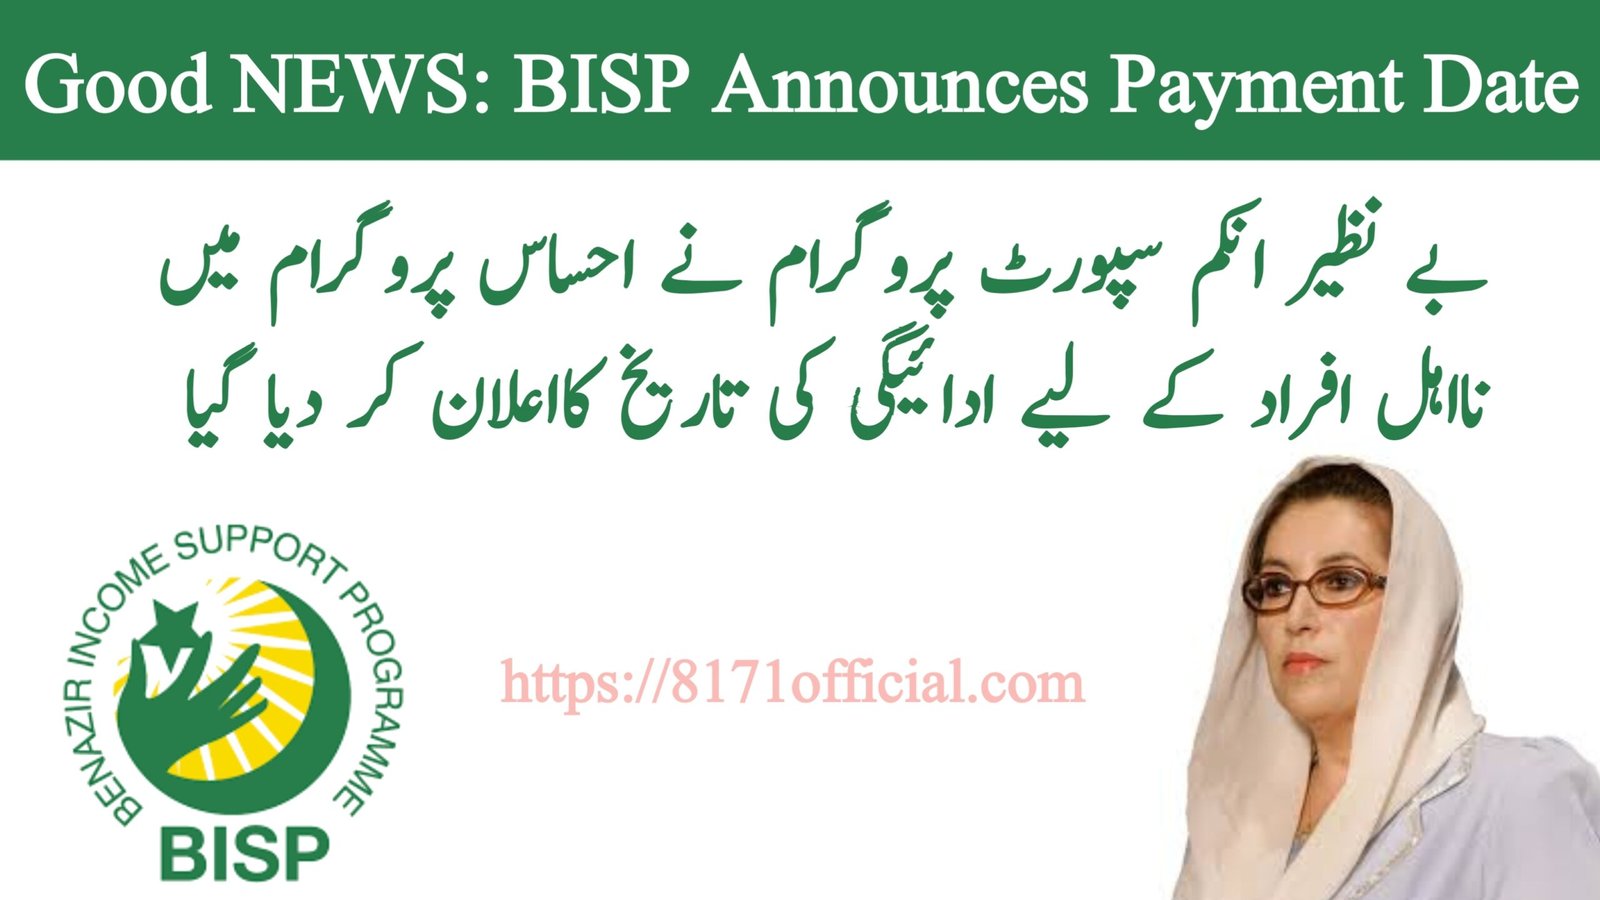 TODAY NEWS: BISP Announces Payment Date